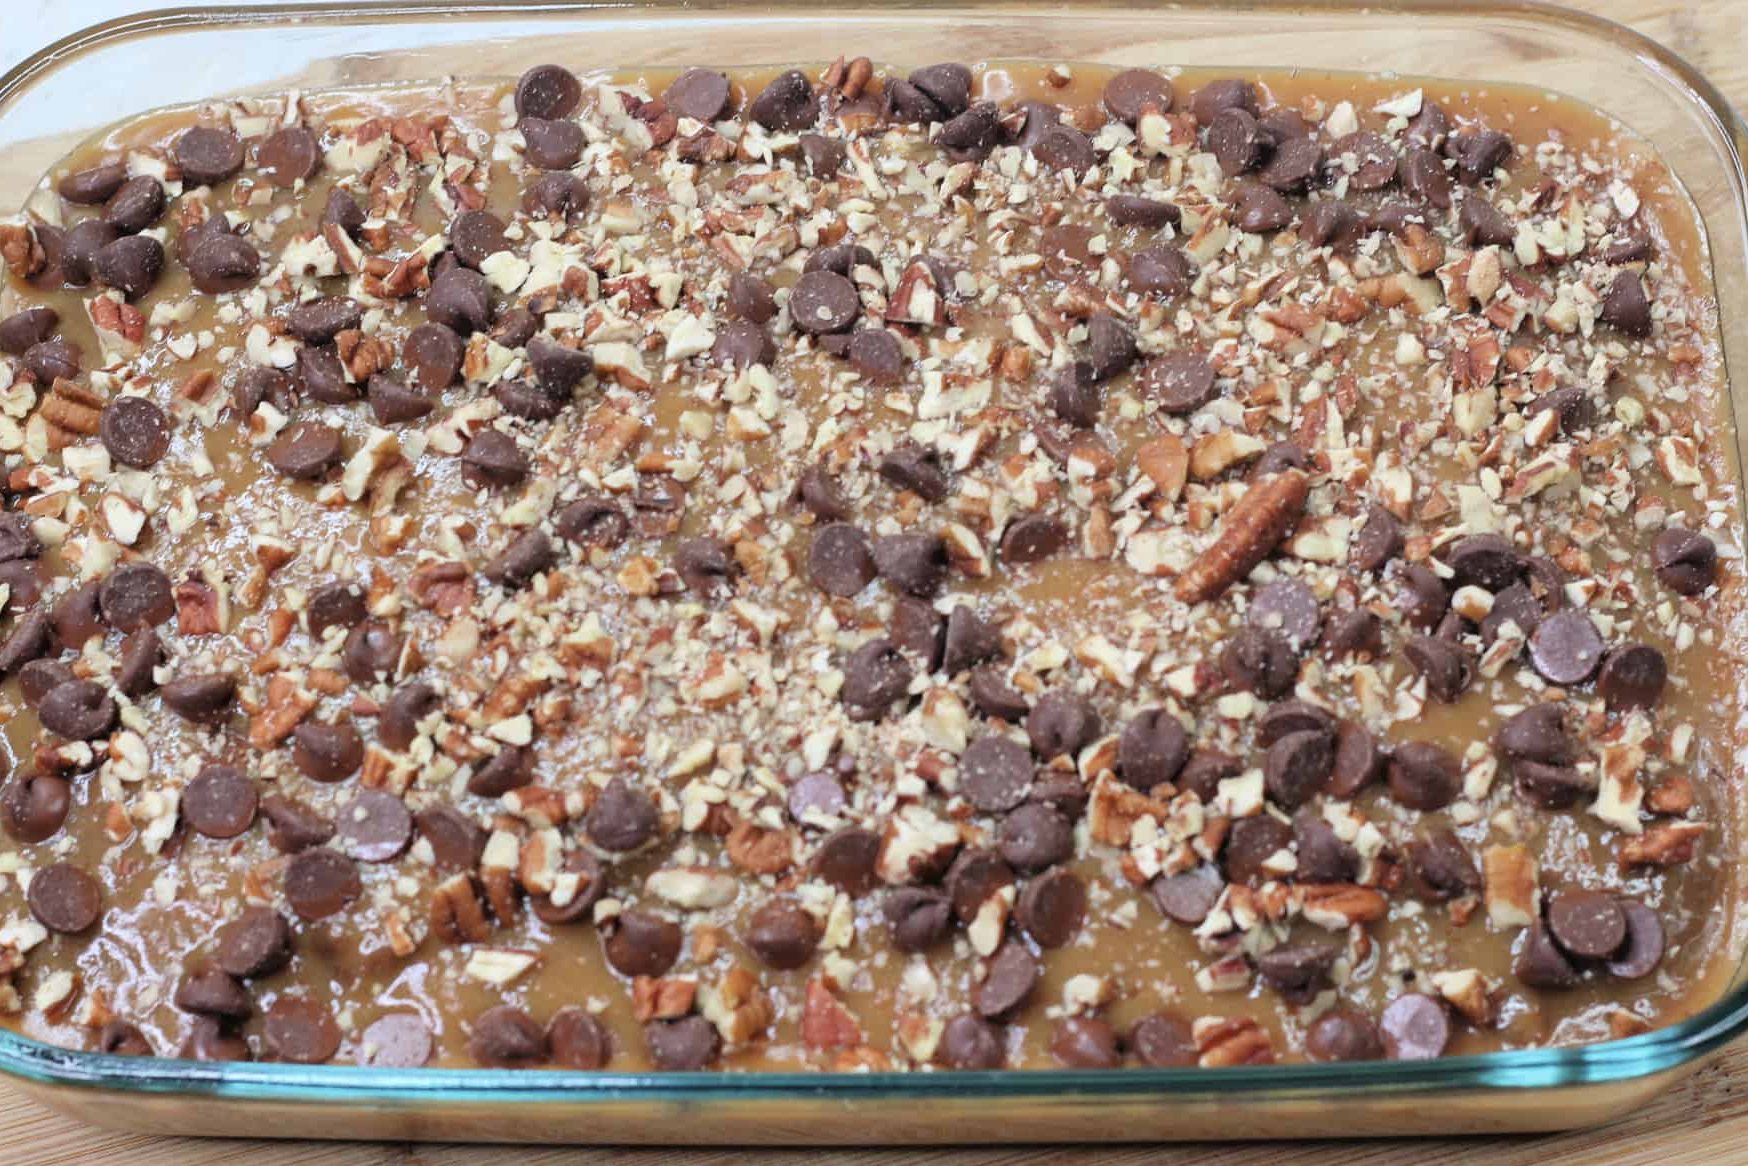 Sprinkle the chocolate chips and pecans over the caramel topping and cake.